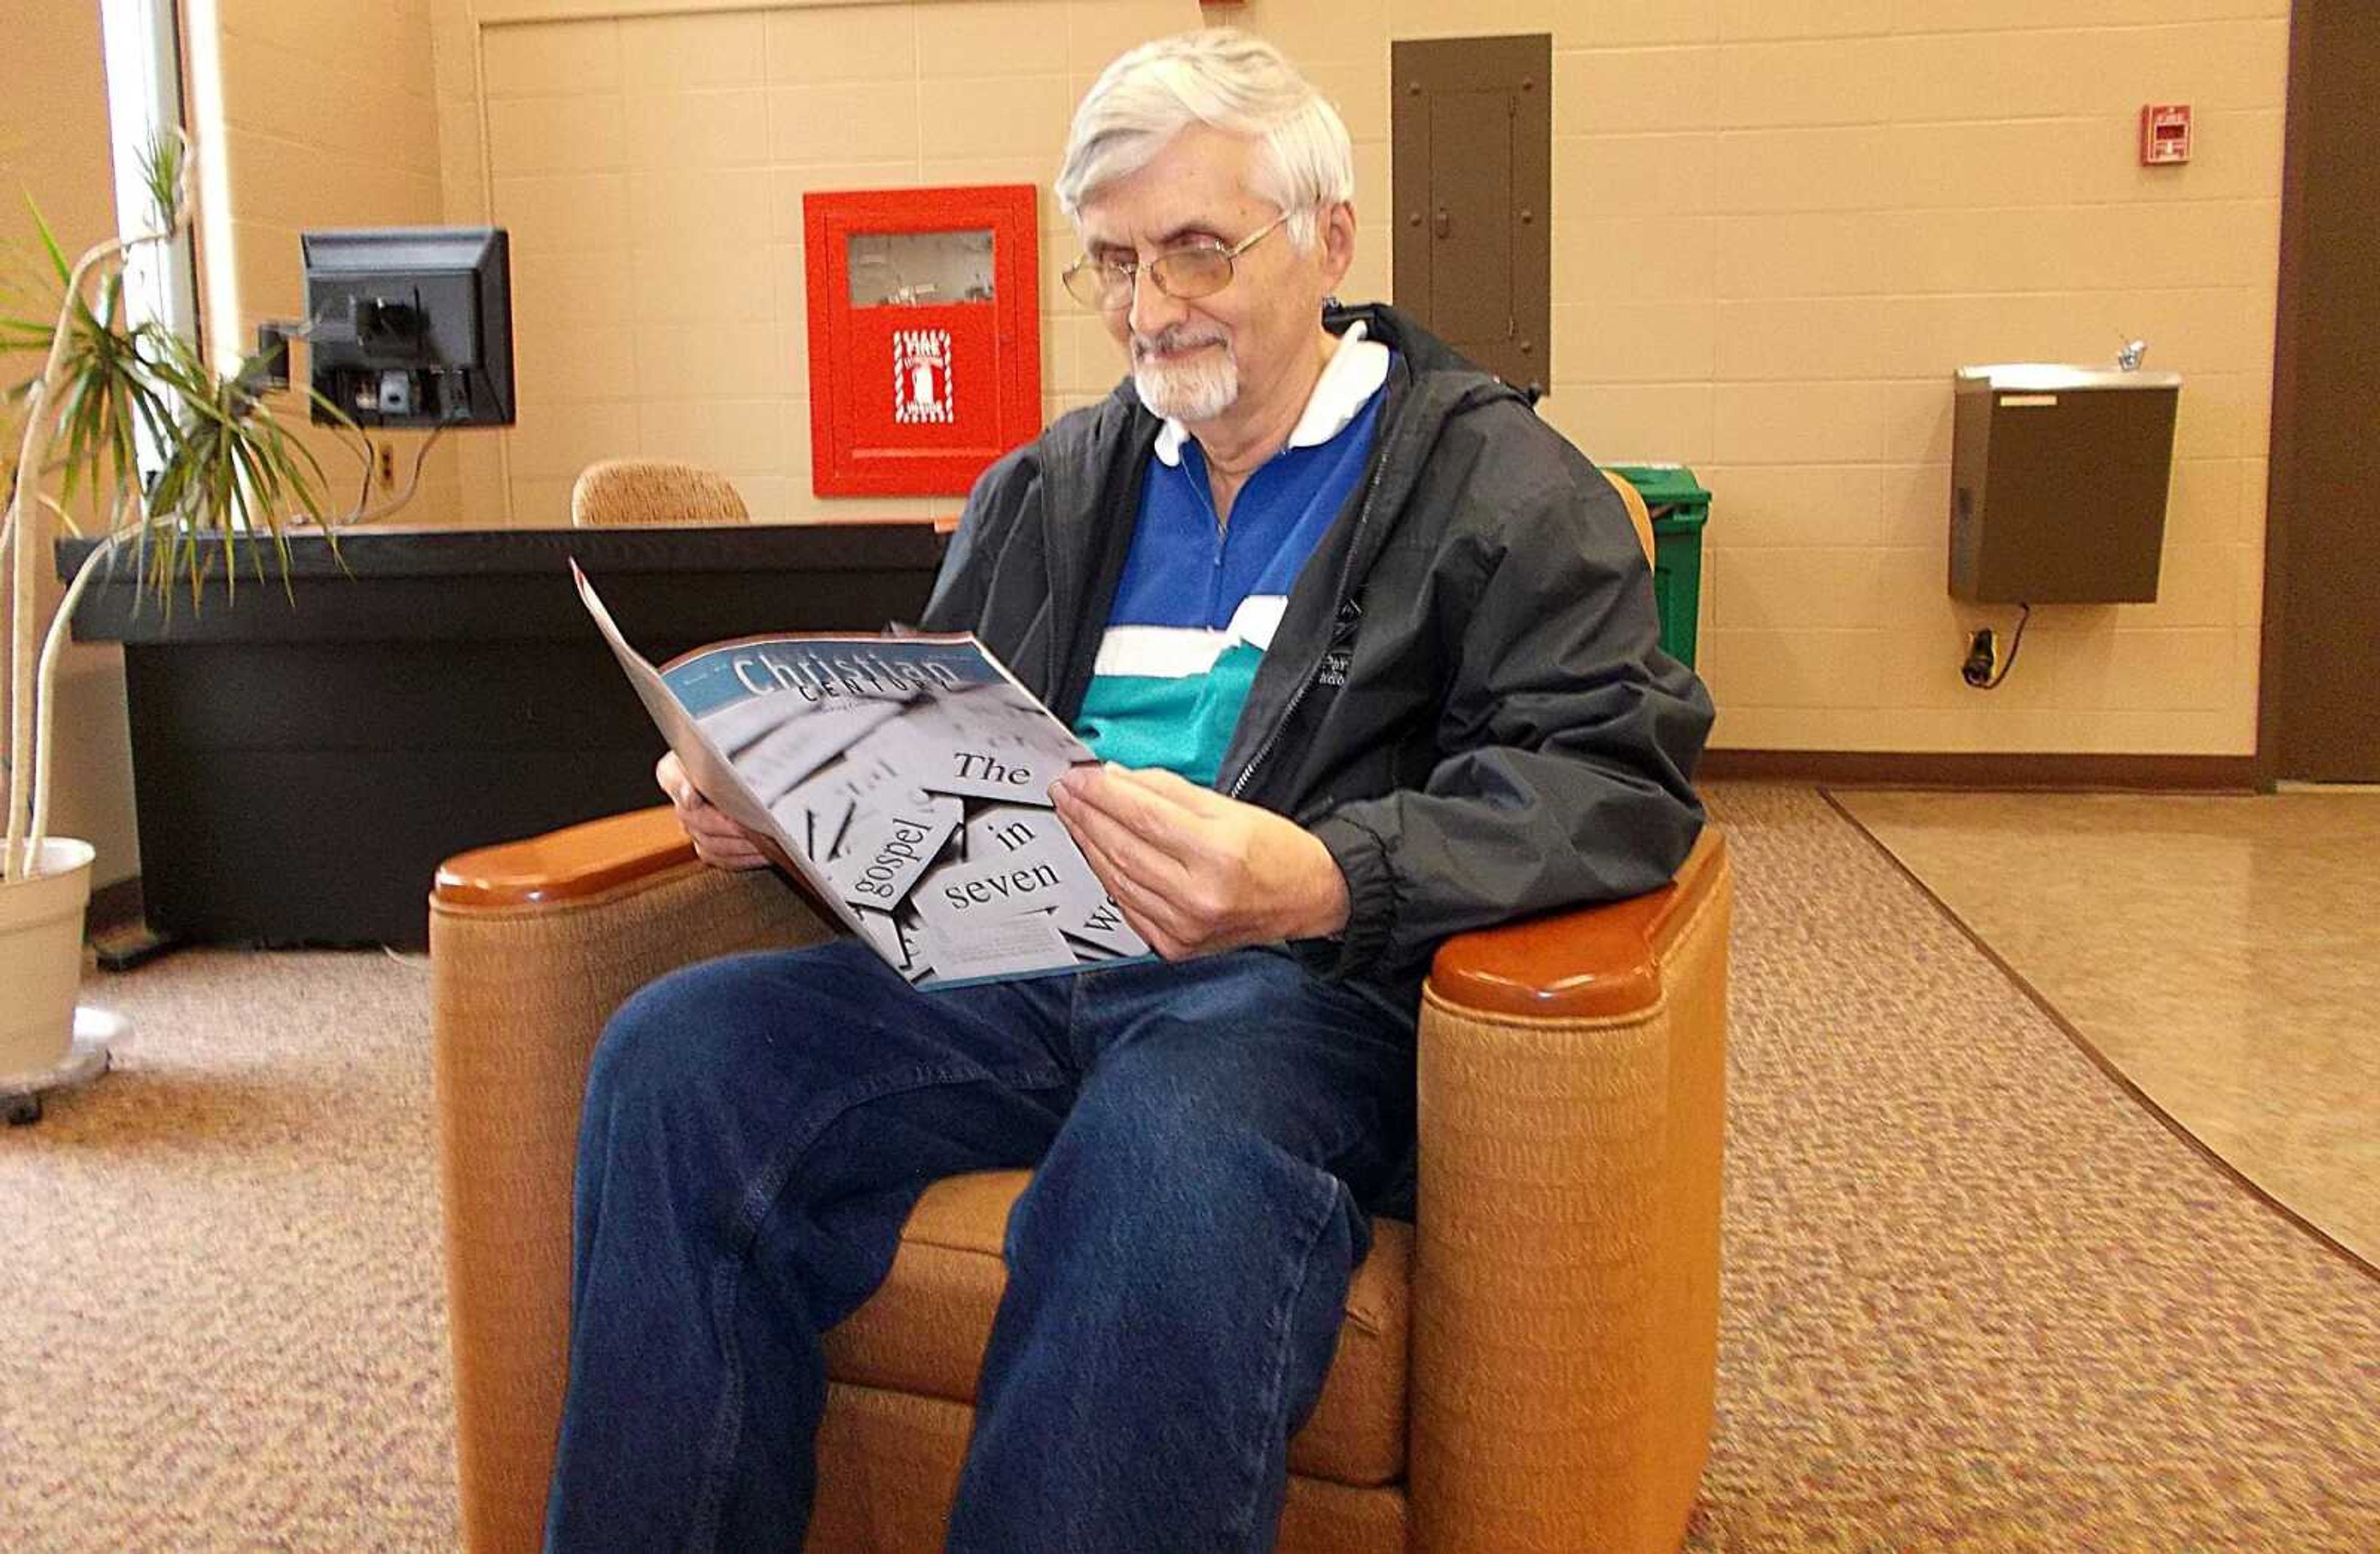 Dr. John Coleman relaxing and reading at Kent Library on his break. Photo by Kelly Lu Holder